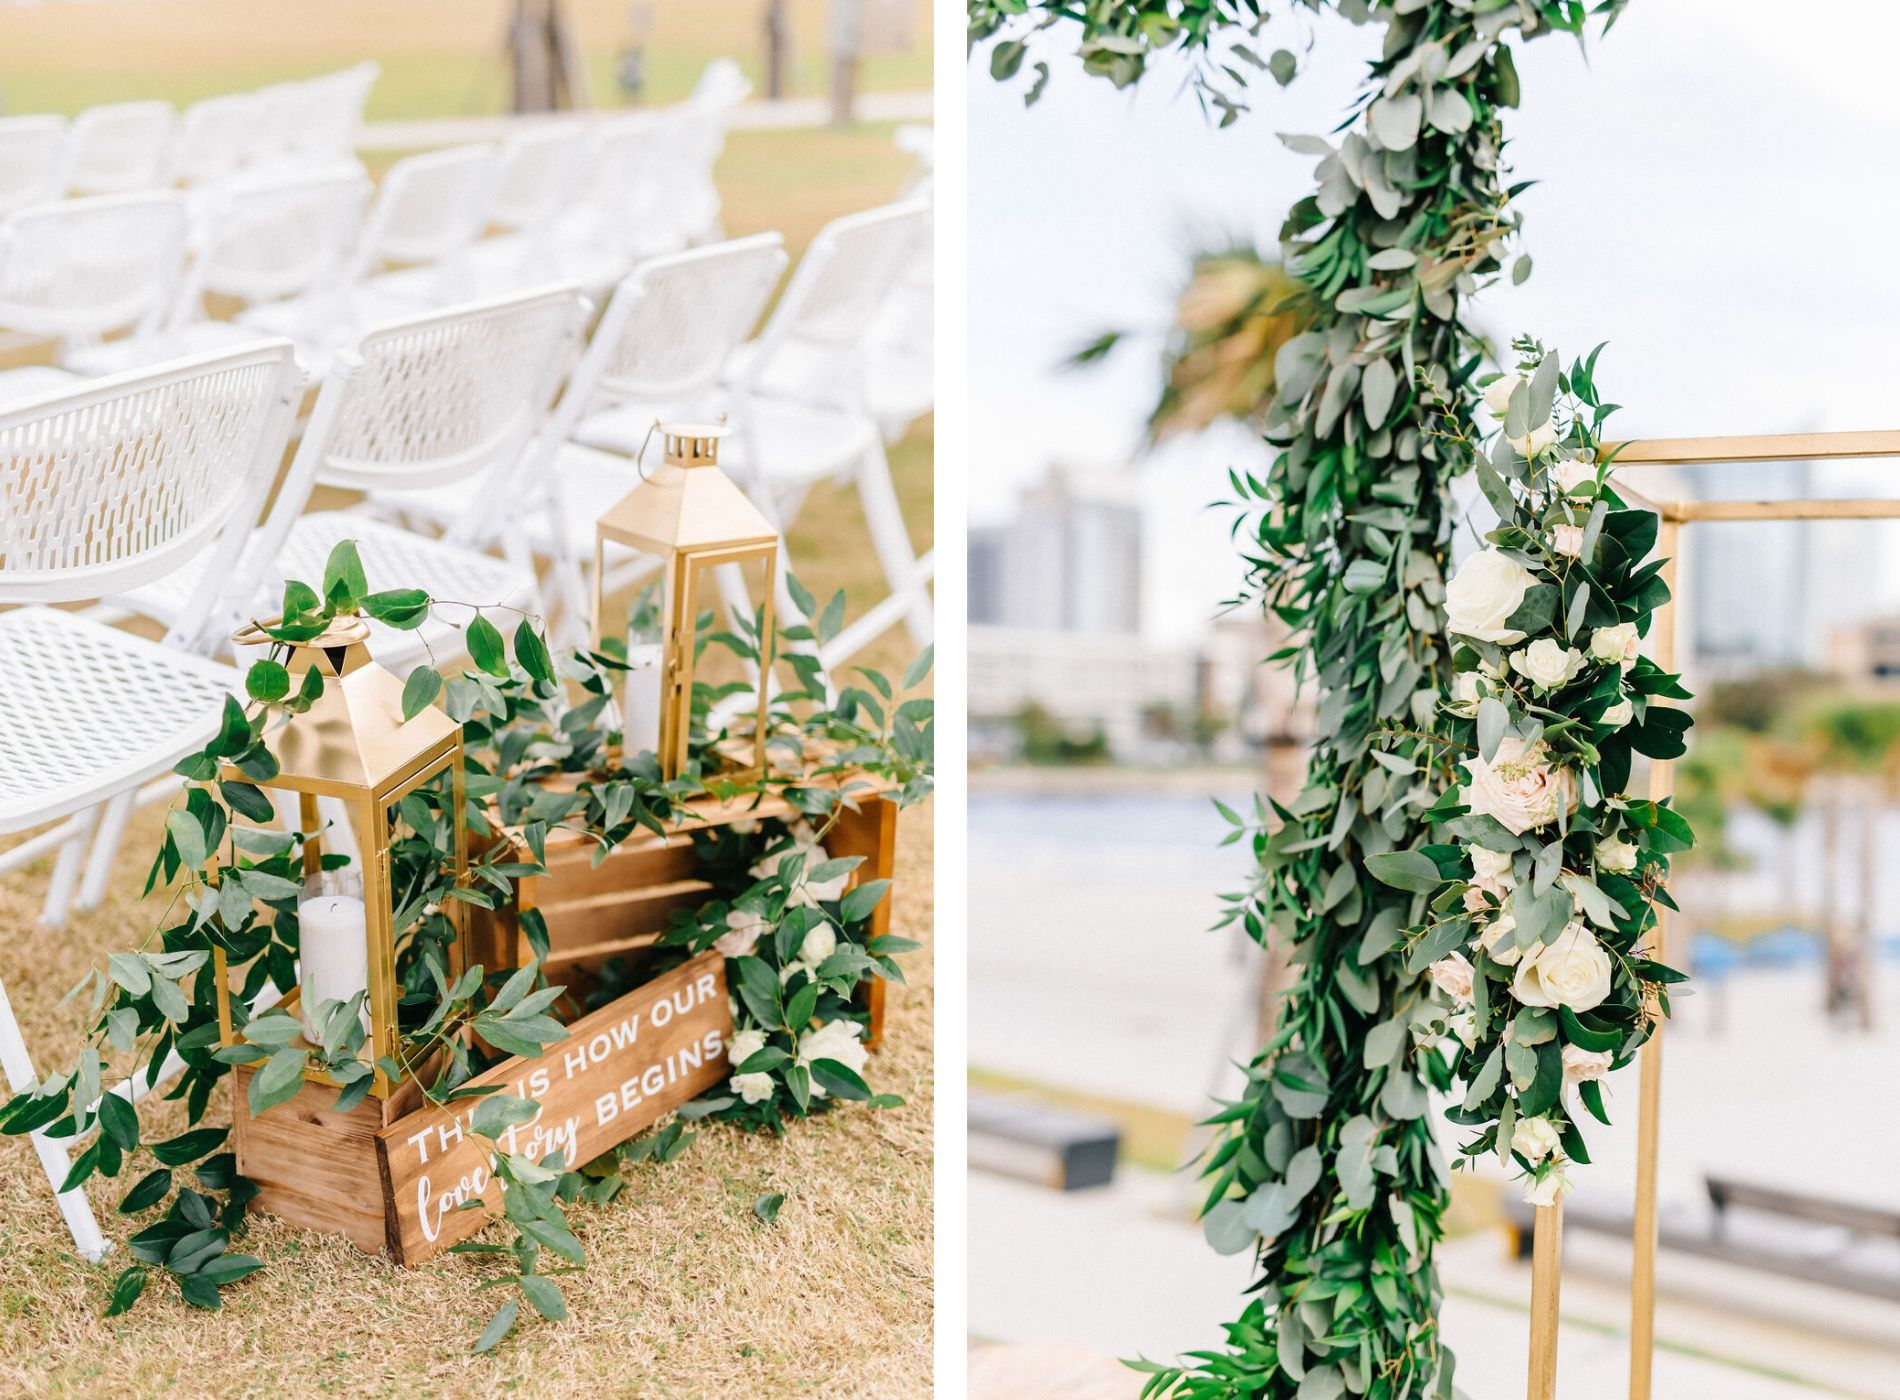 Classic Florida Outdoor Wedding Ceremony with Elegant Decor, Gold Lantern Accents, White and Ivory Roes with Greenery | Tampa Bay Wedding Planner UNIQUE Weddings and Events